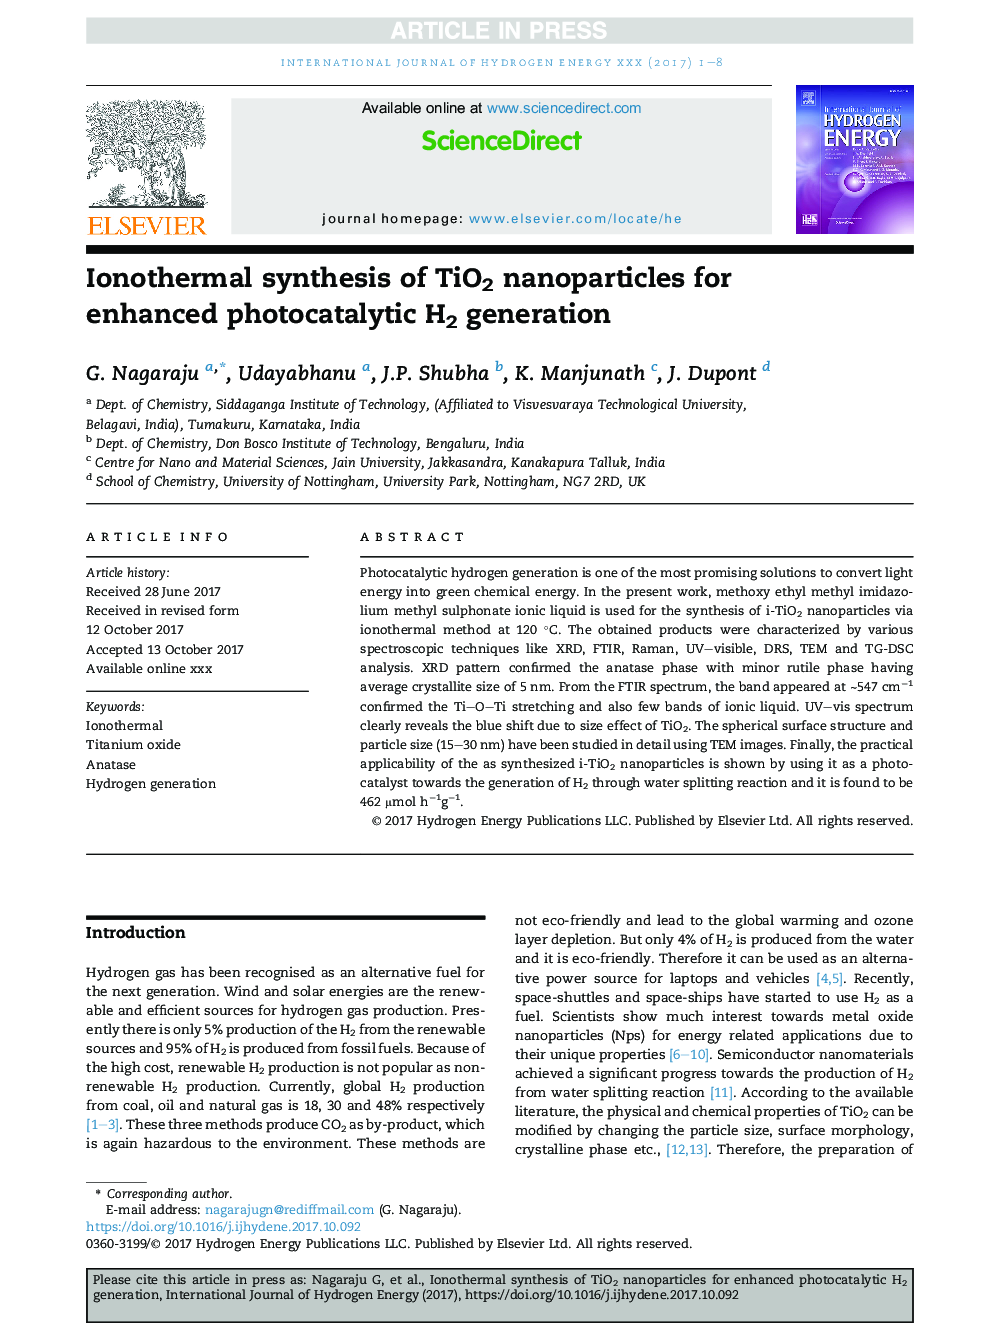 Ionothermal synthesis of TiO2 nanoparticles for enhanced photocatalytic H2 generation